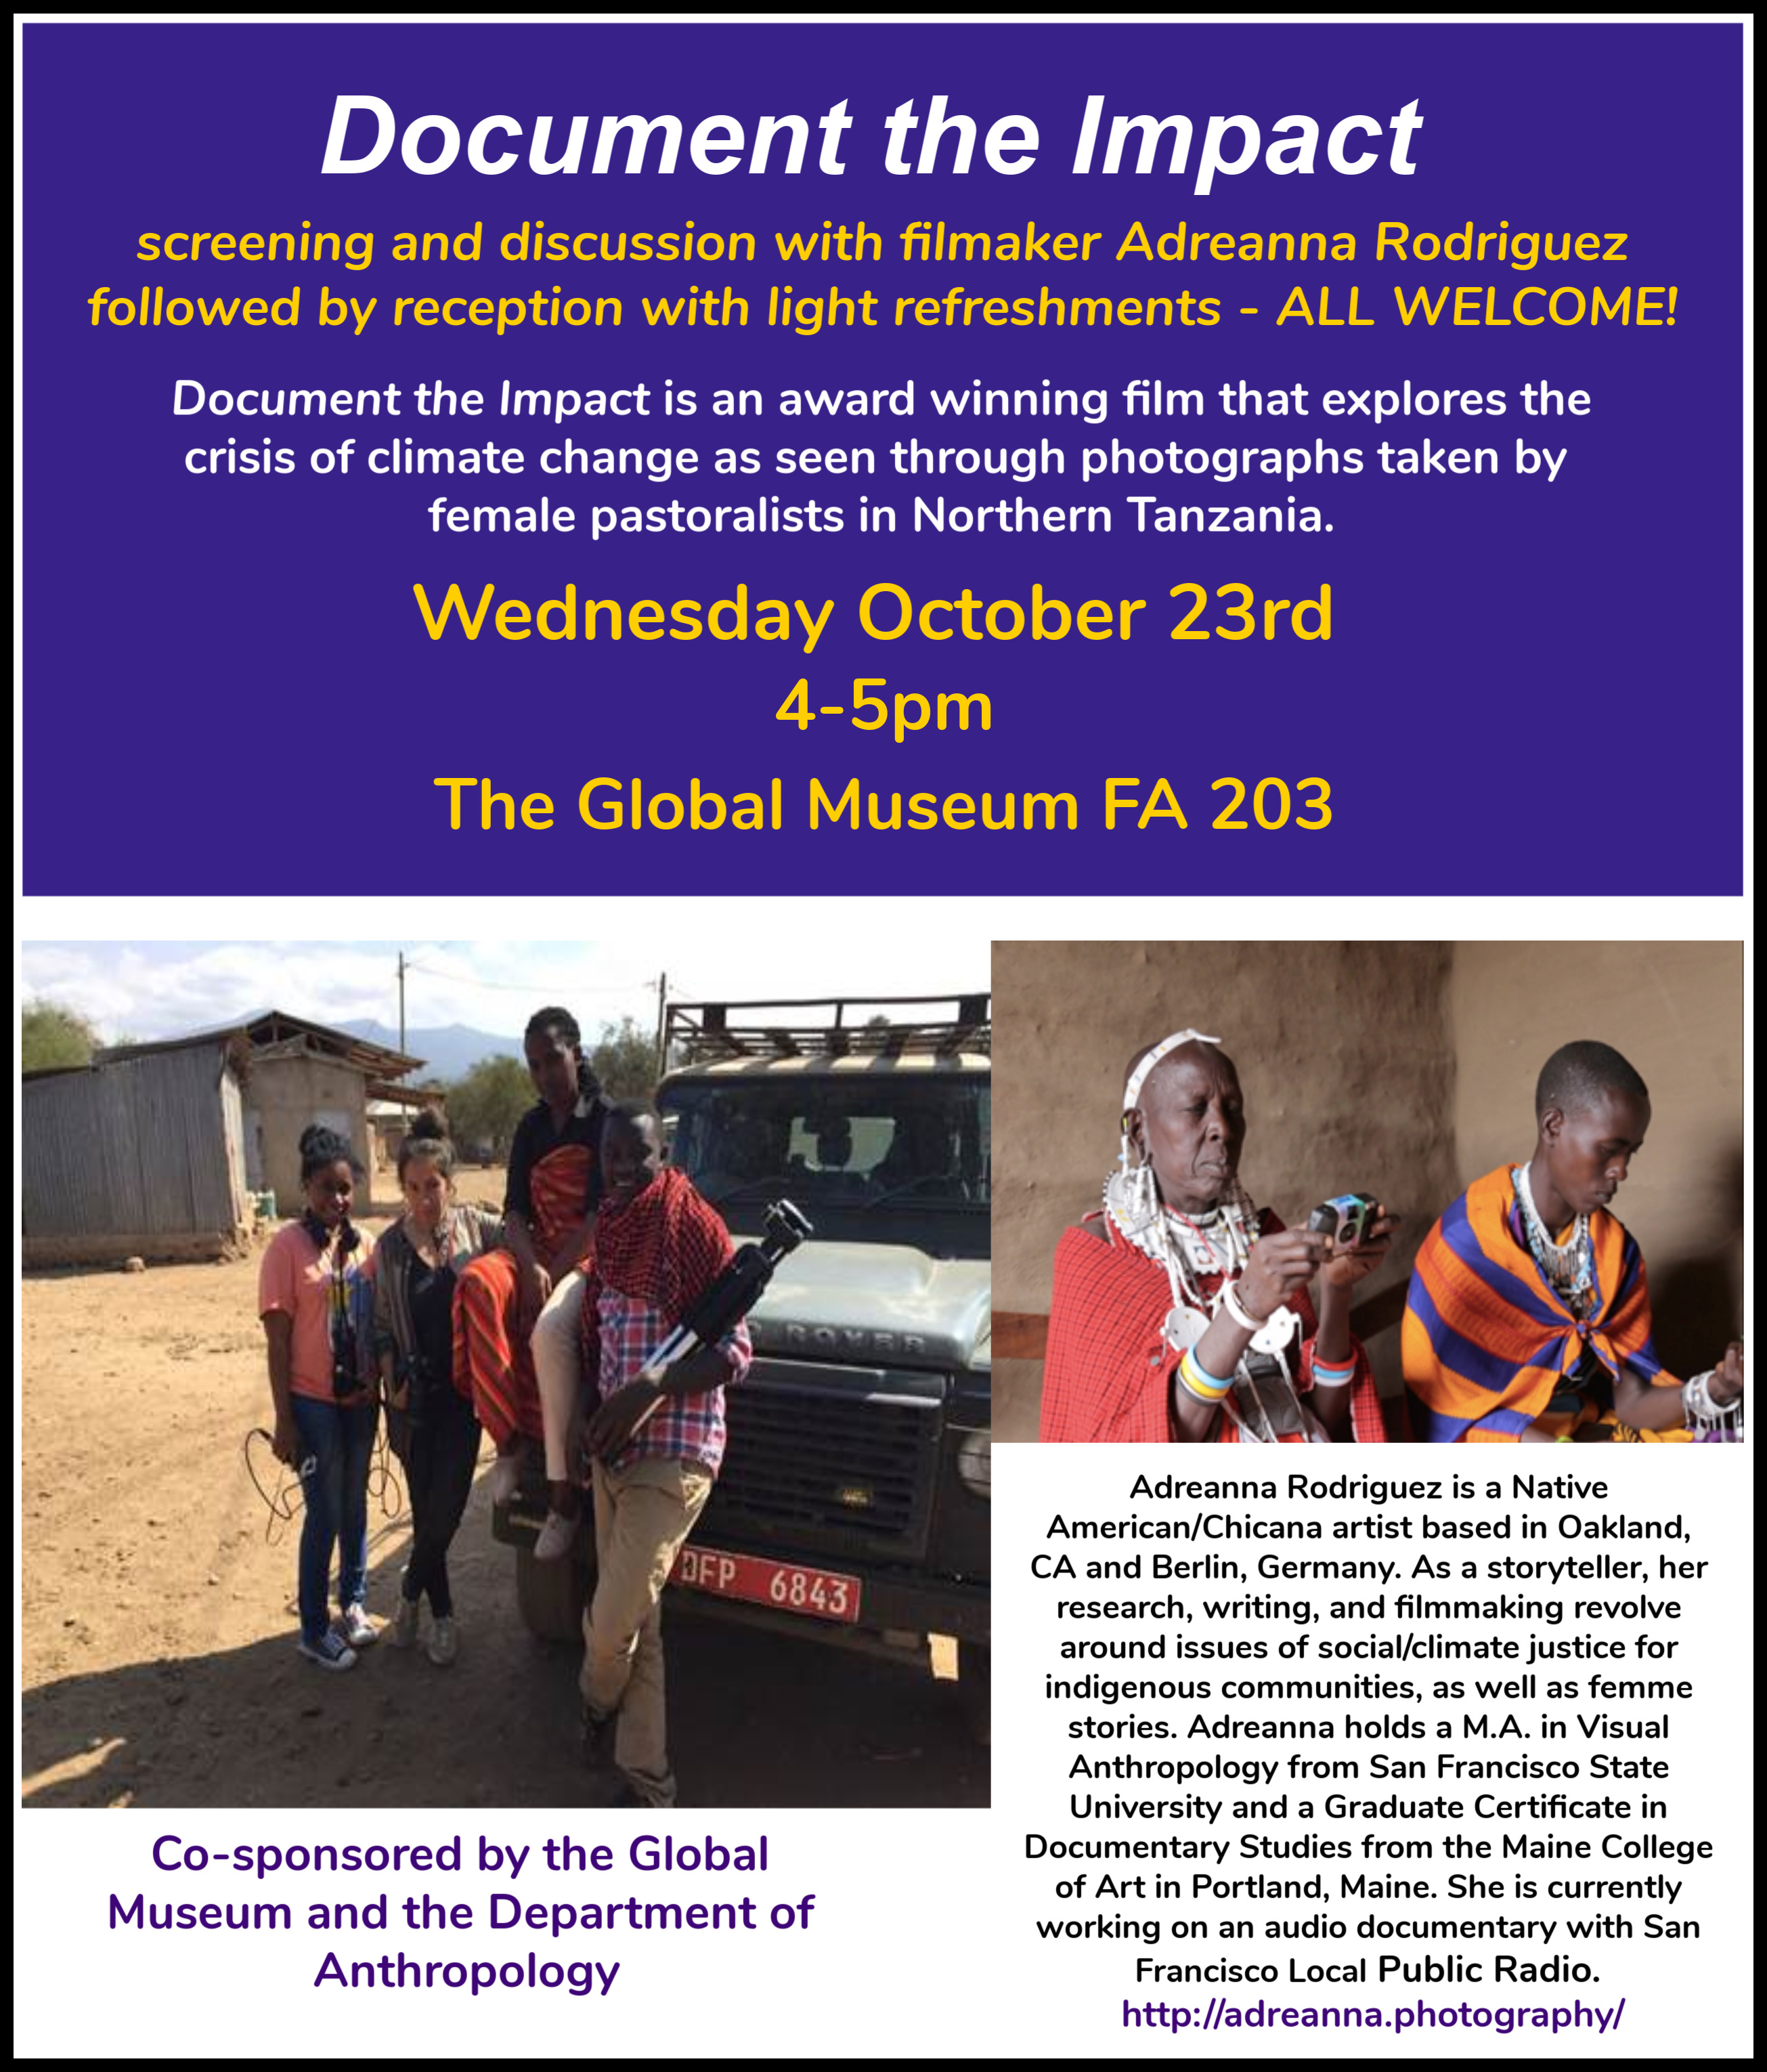  Document the Impact: A Screening and discussion with filmmaker Adreanna Rodriguez